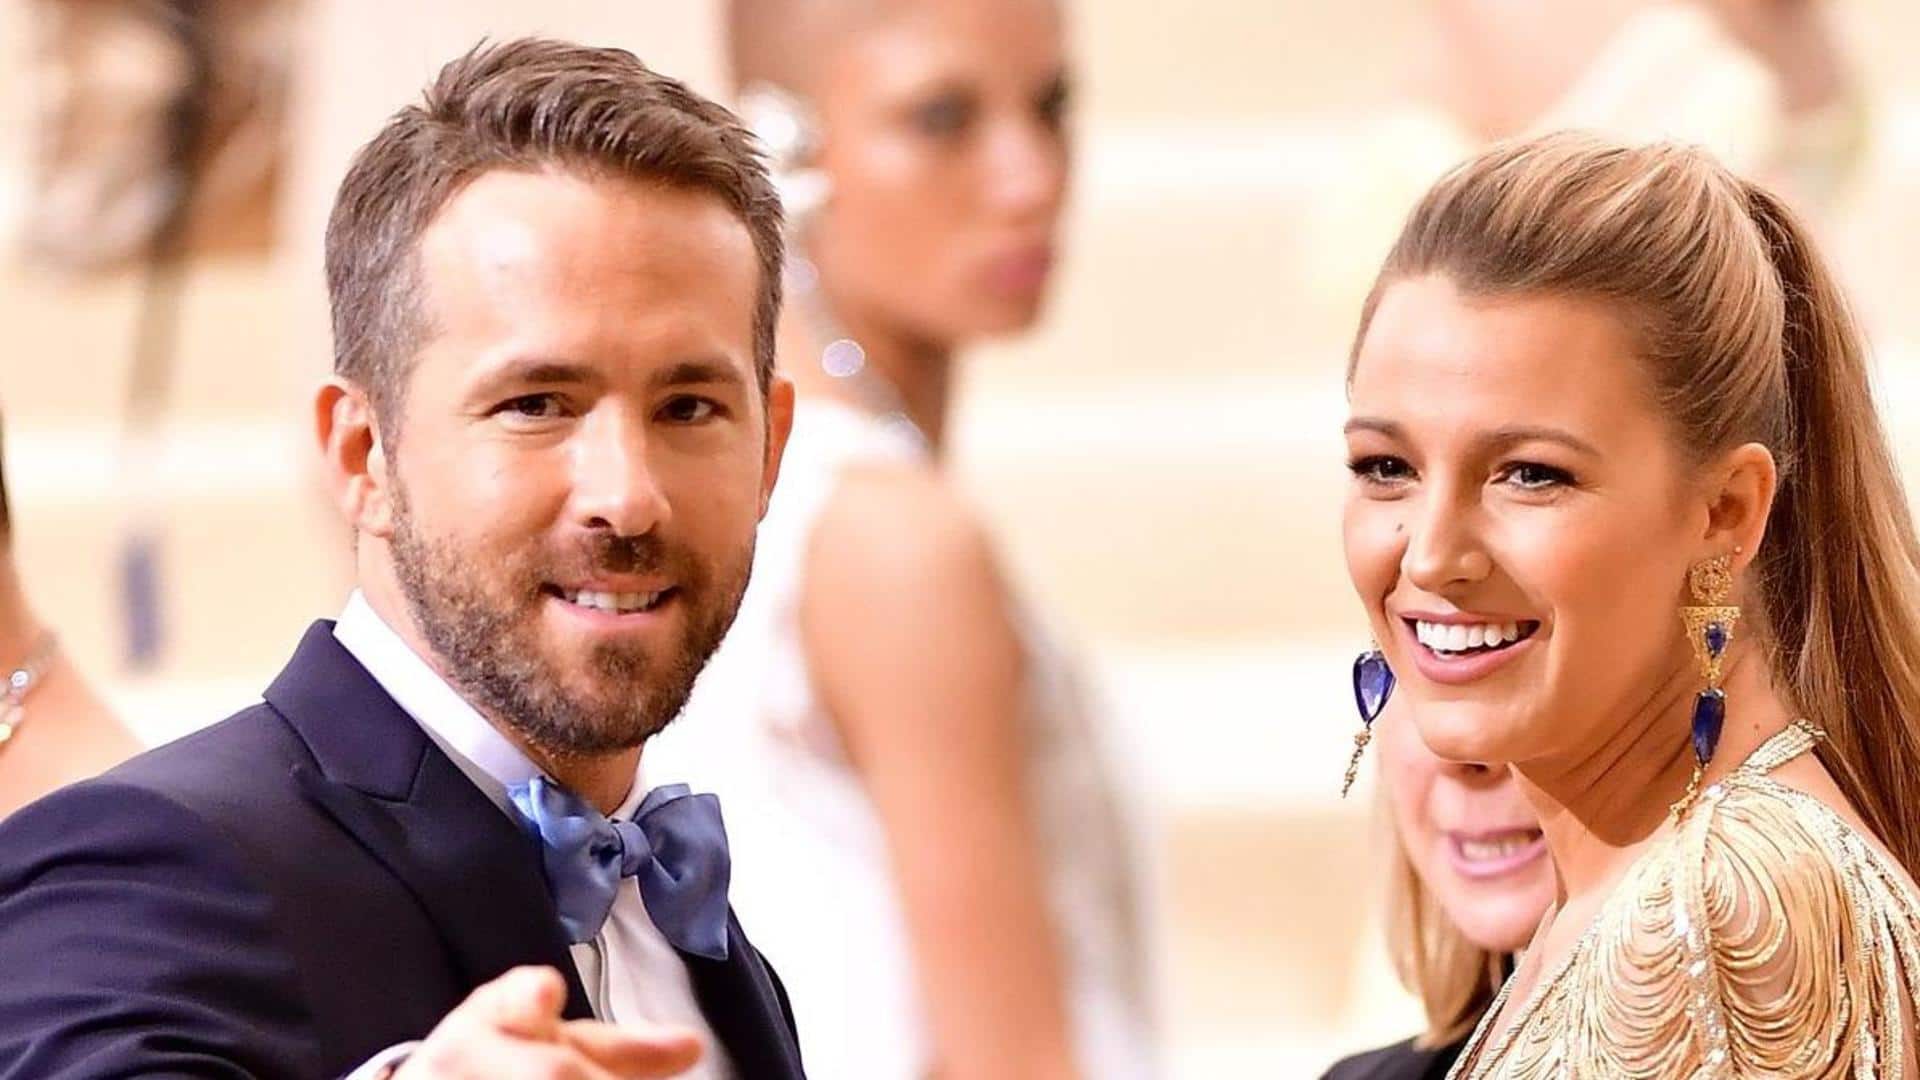 Blake Lively-Ryan Reynolds have welcomed fourth child, suggests cryptic post